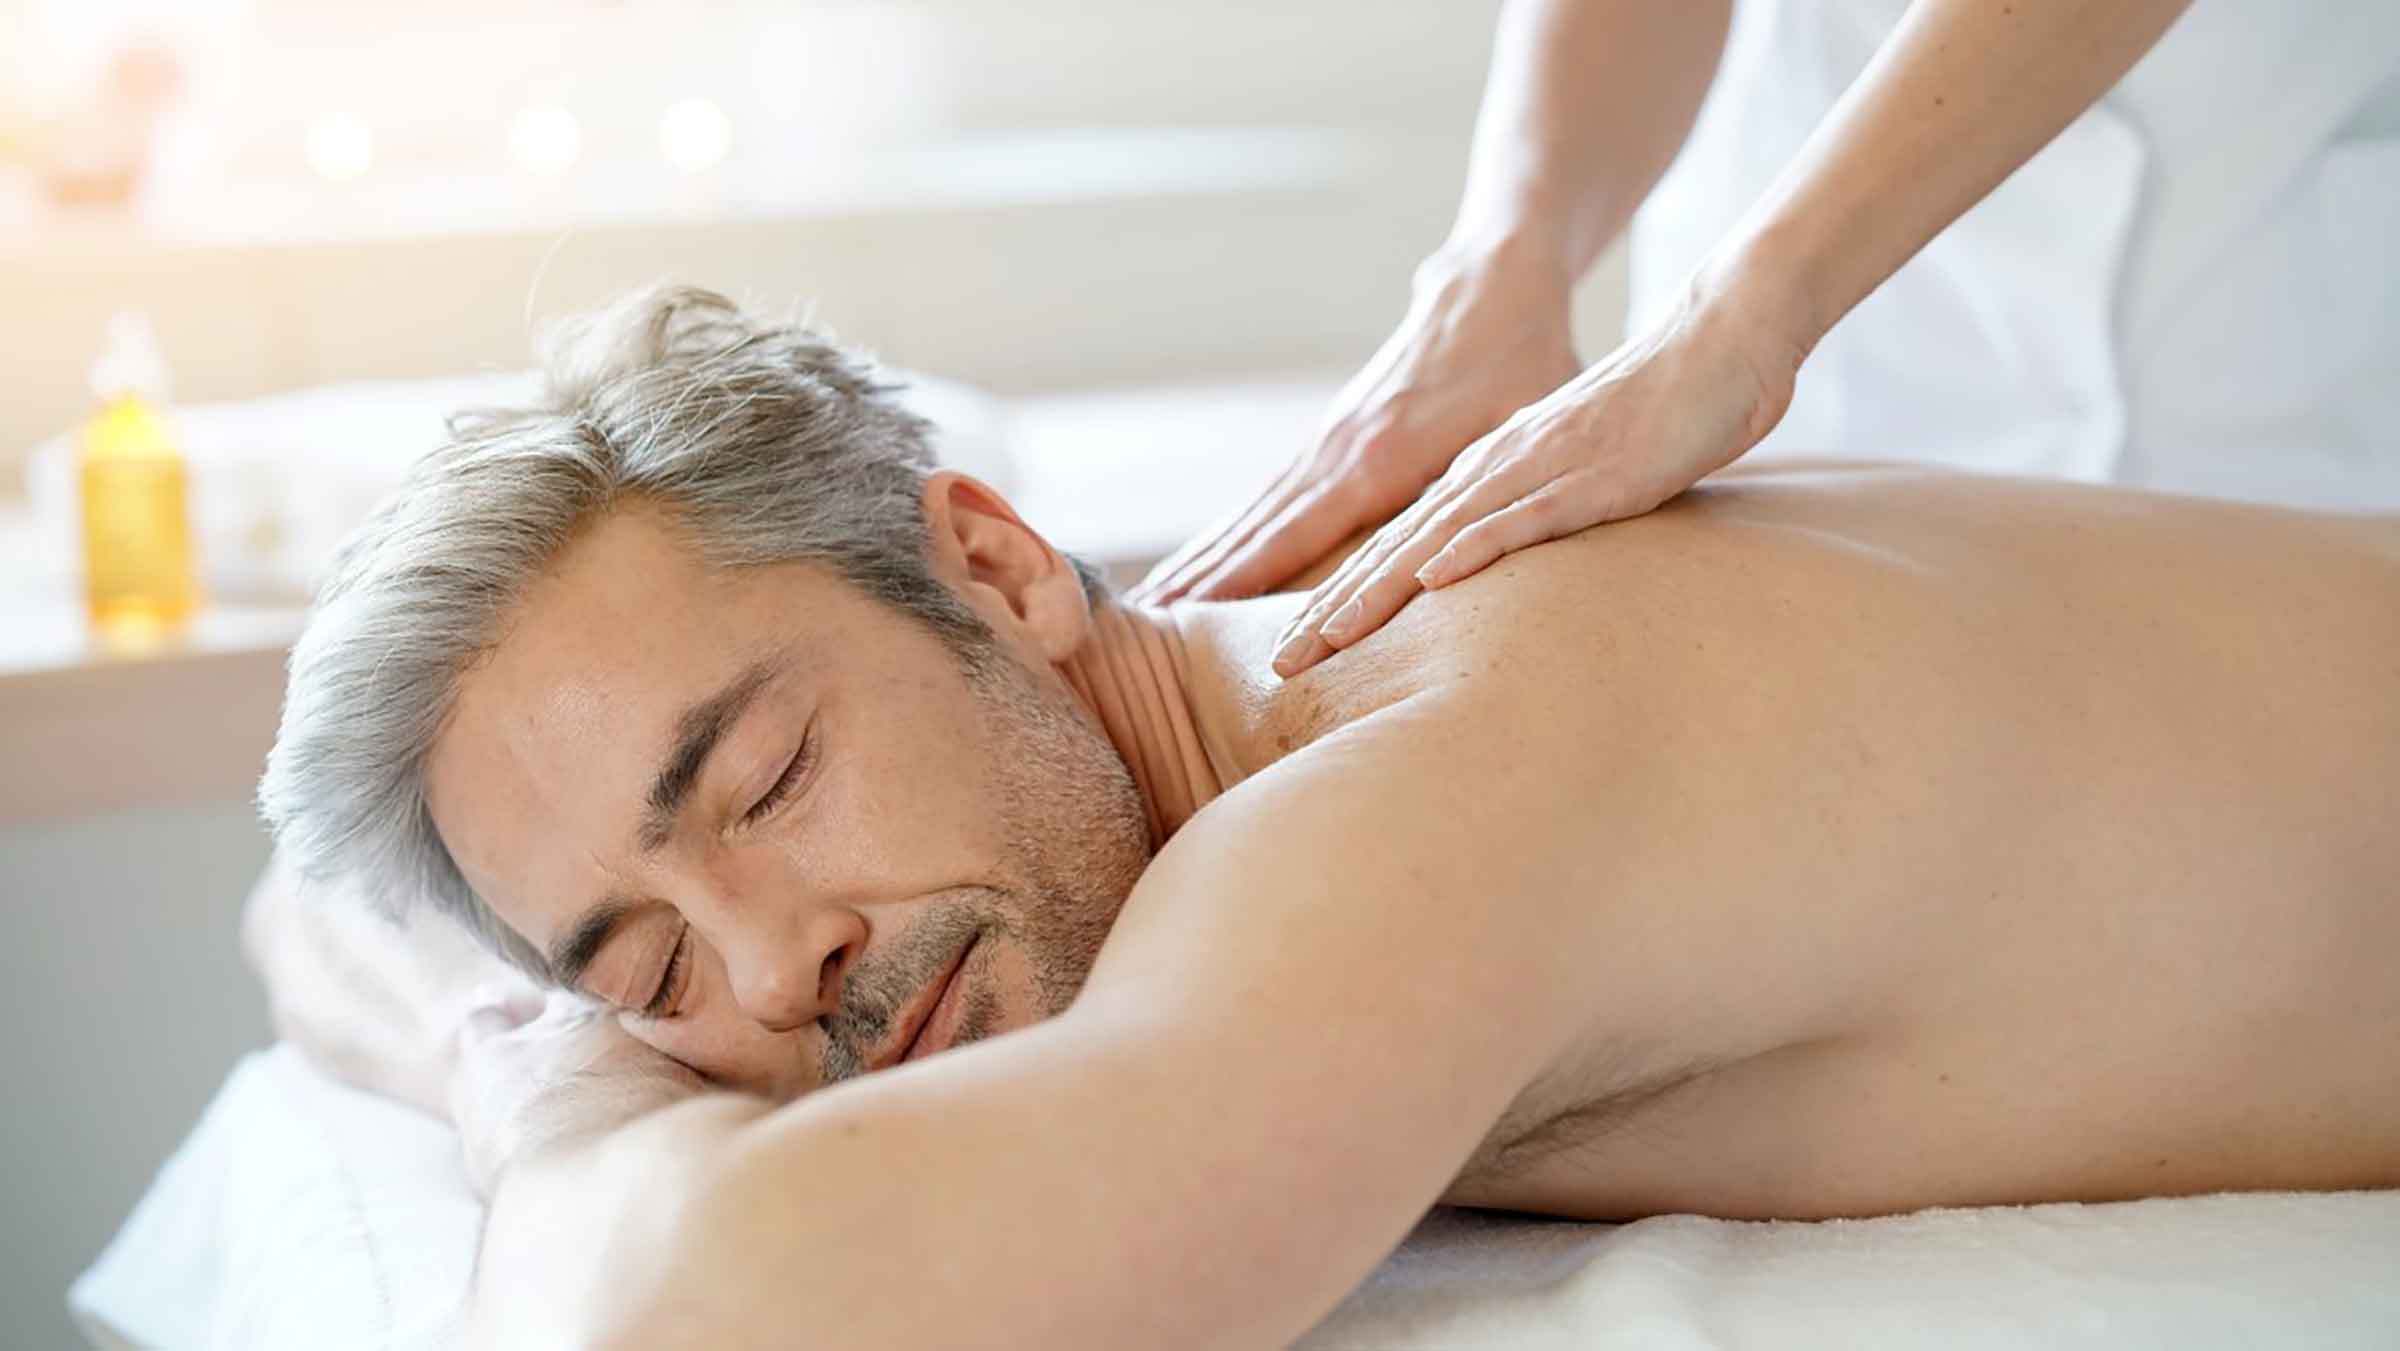 Relieve Tension and Restore Wellness With Shoulder Massage